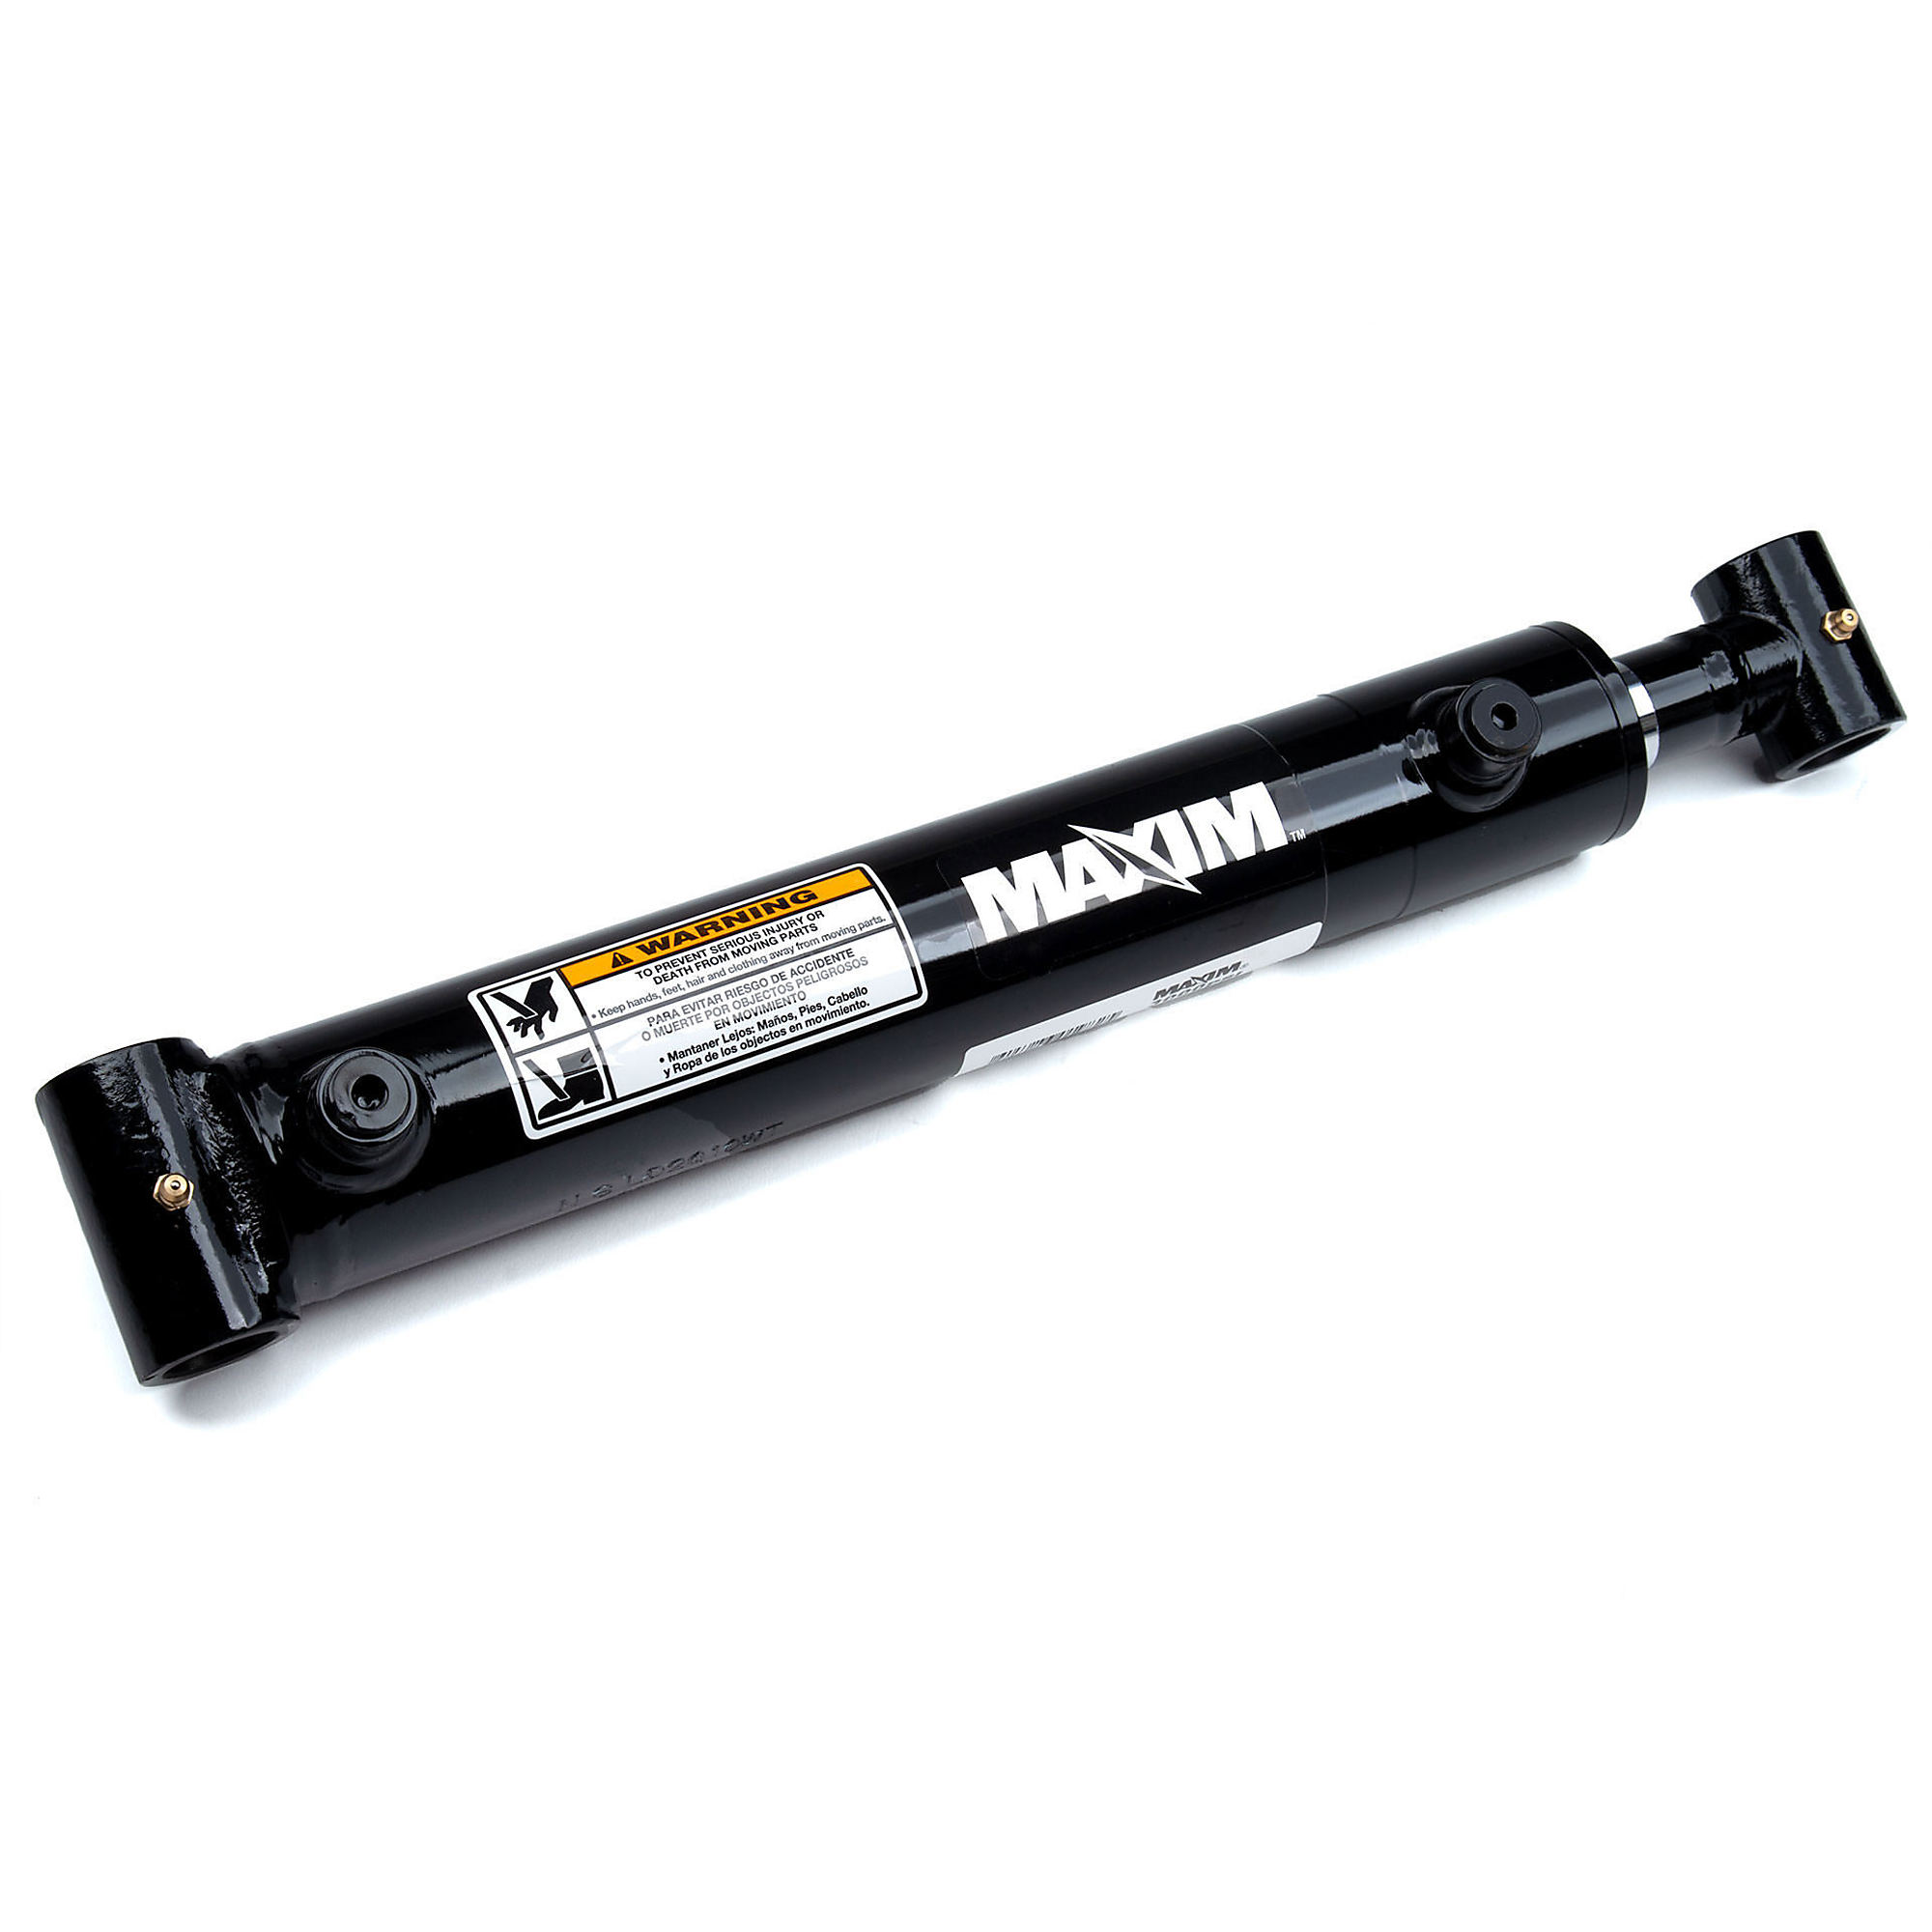 Bailey, Maxim WT Welded Hydraulic Cylinder, Max. PSI 3000, Bore Diameter 3 in, Stroke Length 8 in, Model 288335